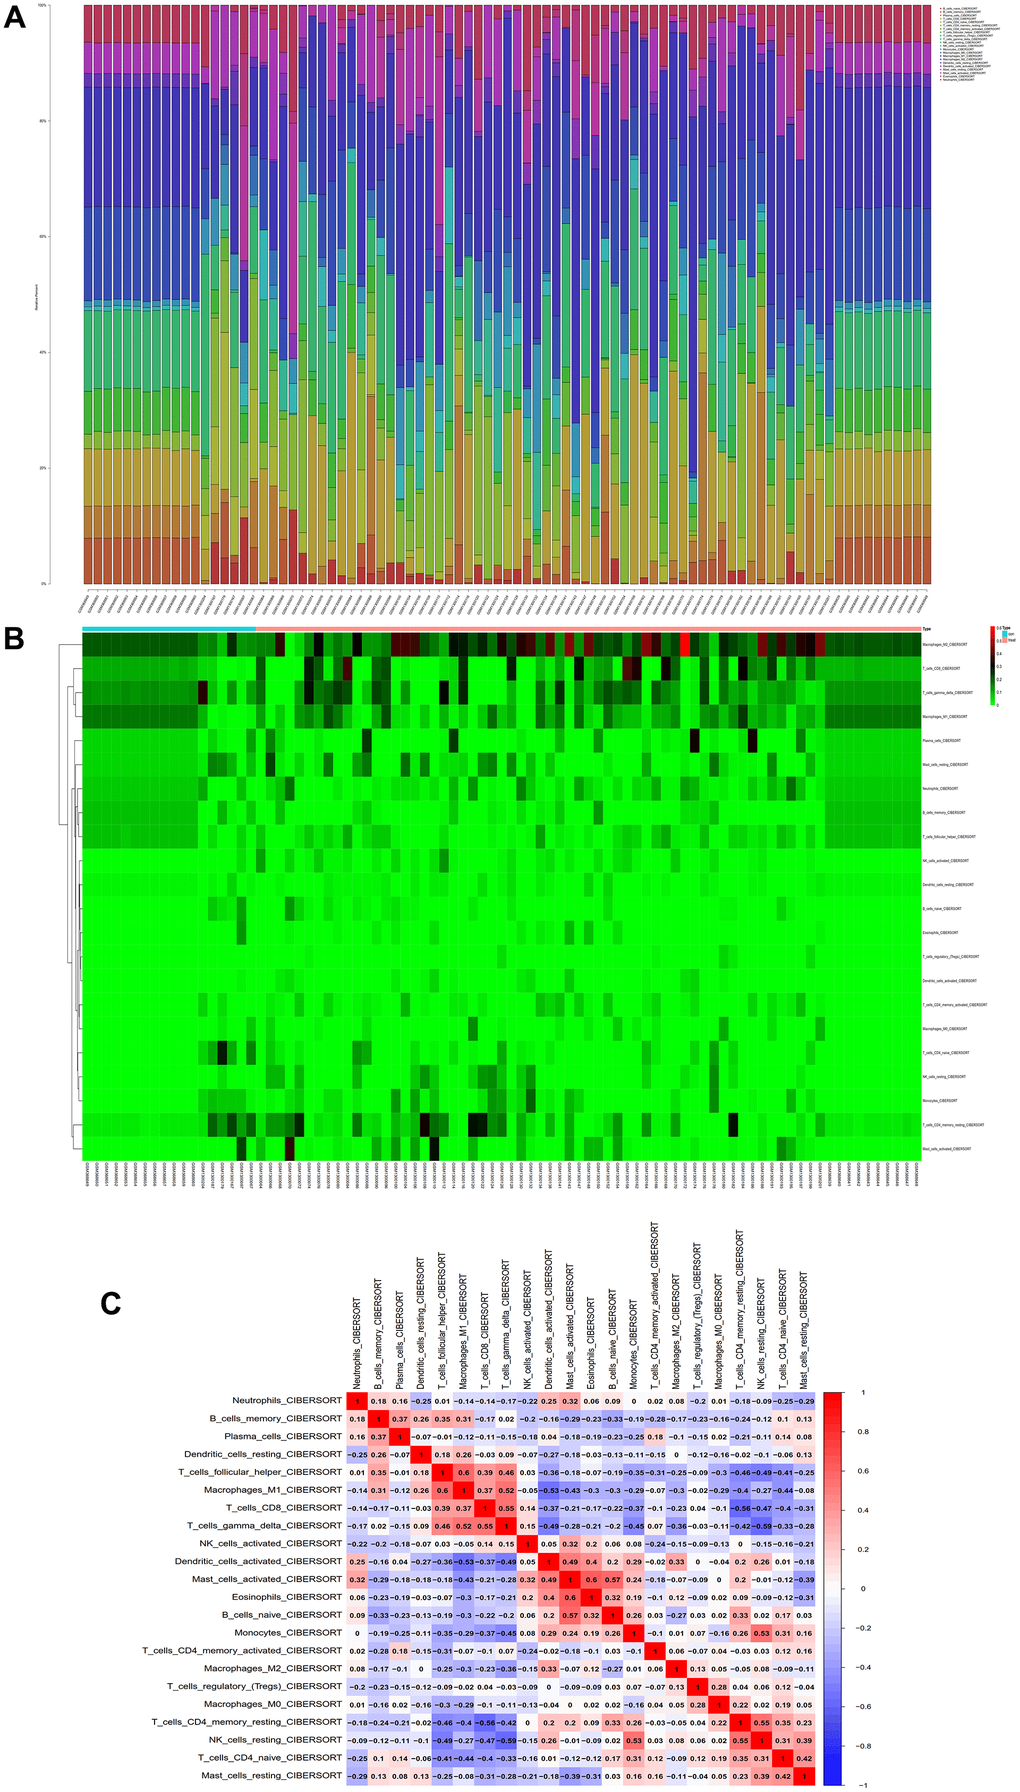 Immunoinfiltration analysis. (A) Whole-gene expression matrix results of proportions of immune cells. (B) Immune cell expression calorigram. (C) Plot of coexpression patterns between immune cell components.